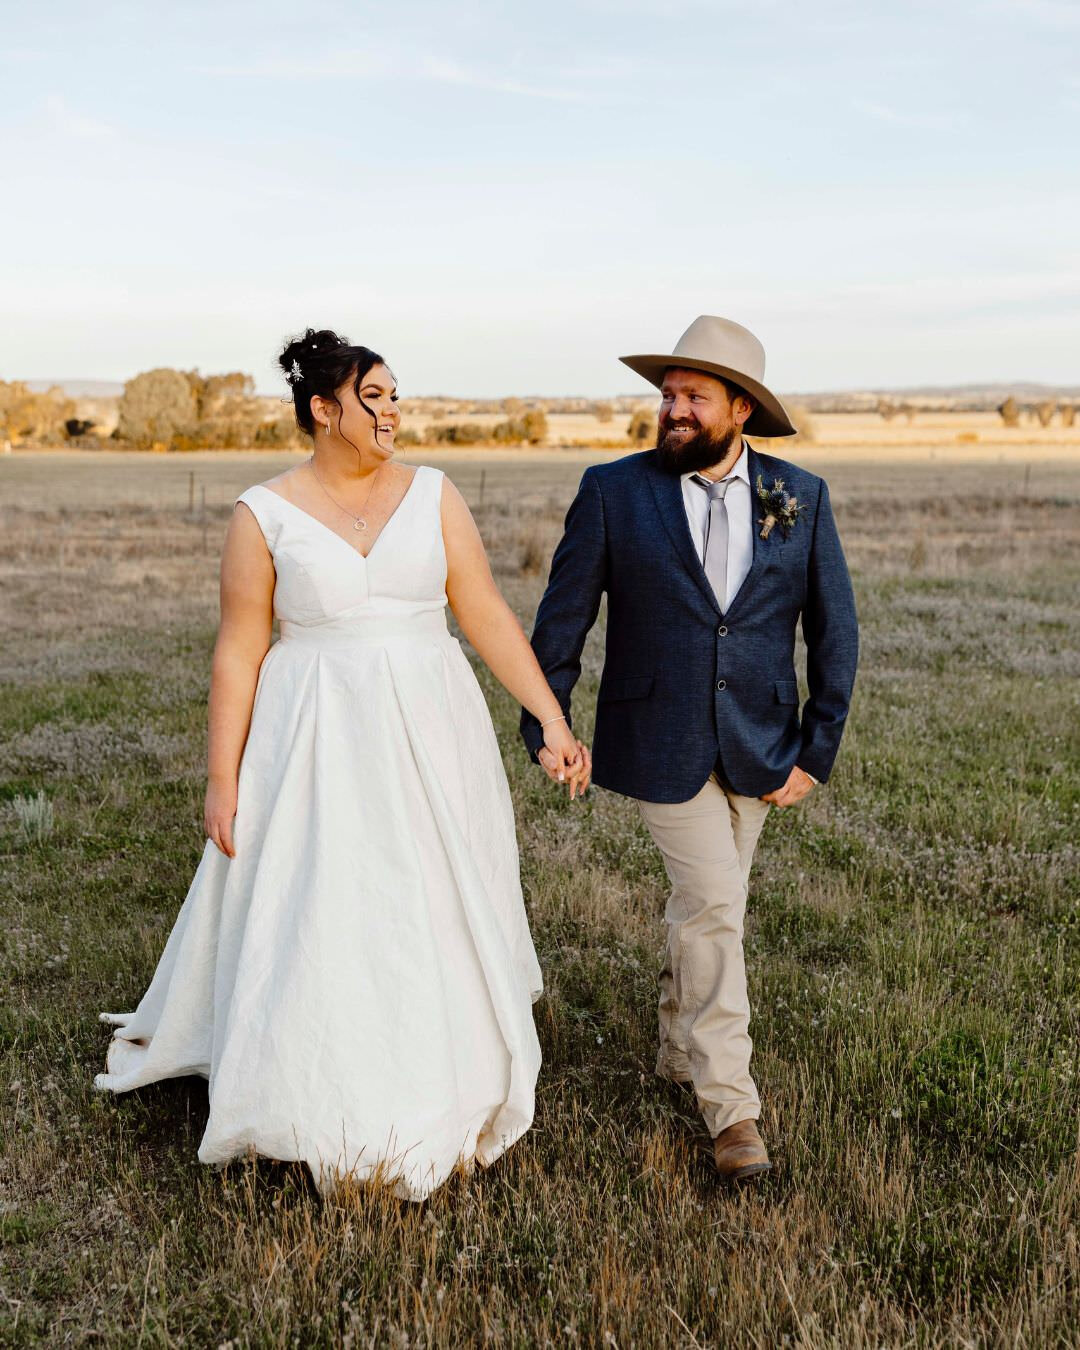 A few sneek peeks from Mandy and Anthony's beautiful wedding at their property just outside of Forbes. Such beautiful light and so many smiles all day! ⁣
#weddingforbes #forbesweddingphotographer #countryweddingnsw  #orangewedding #kirstencunninghamp